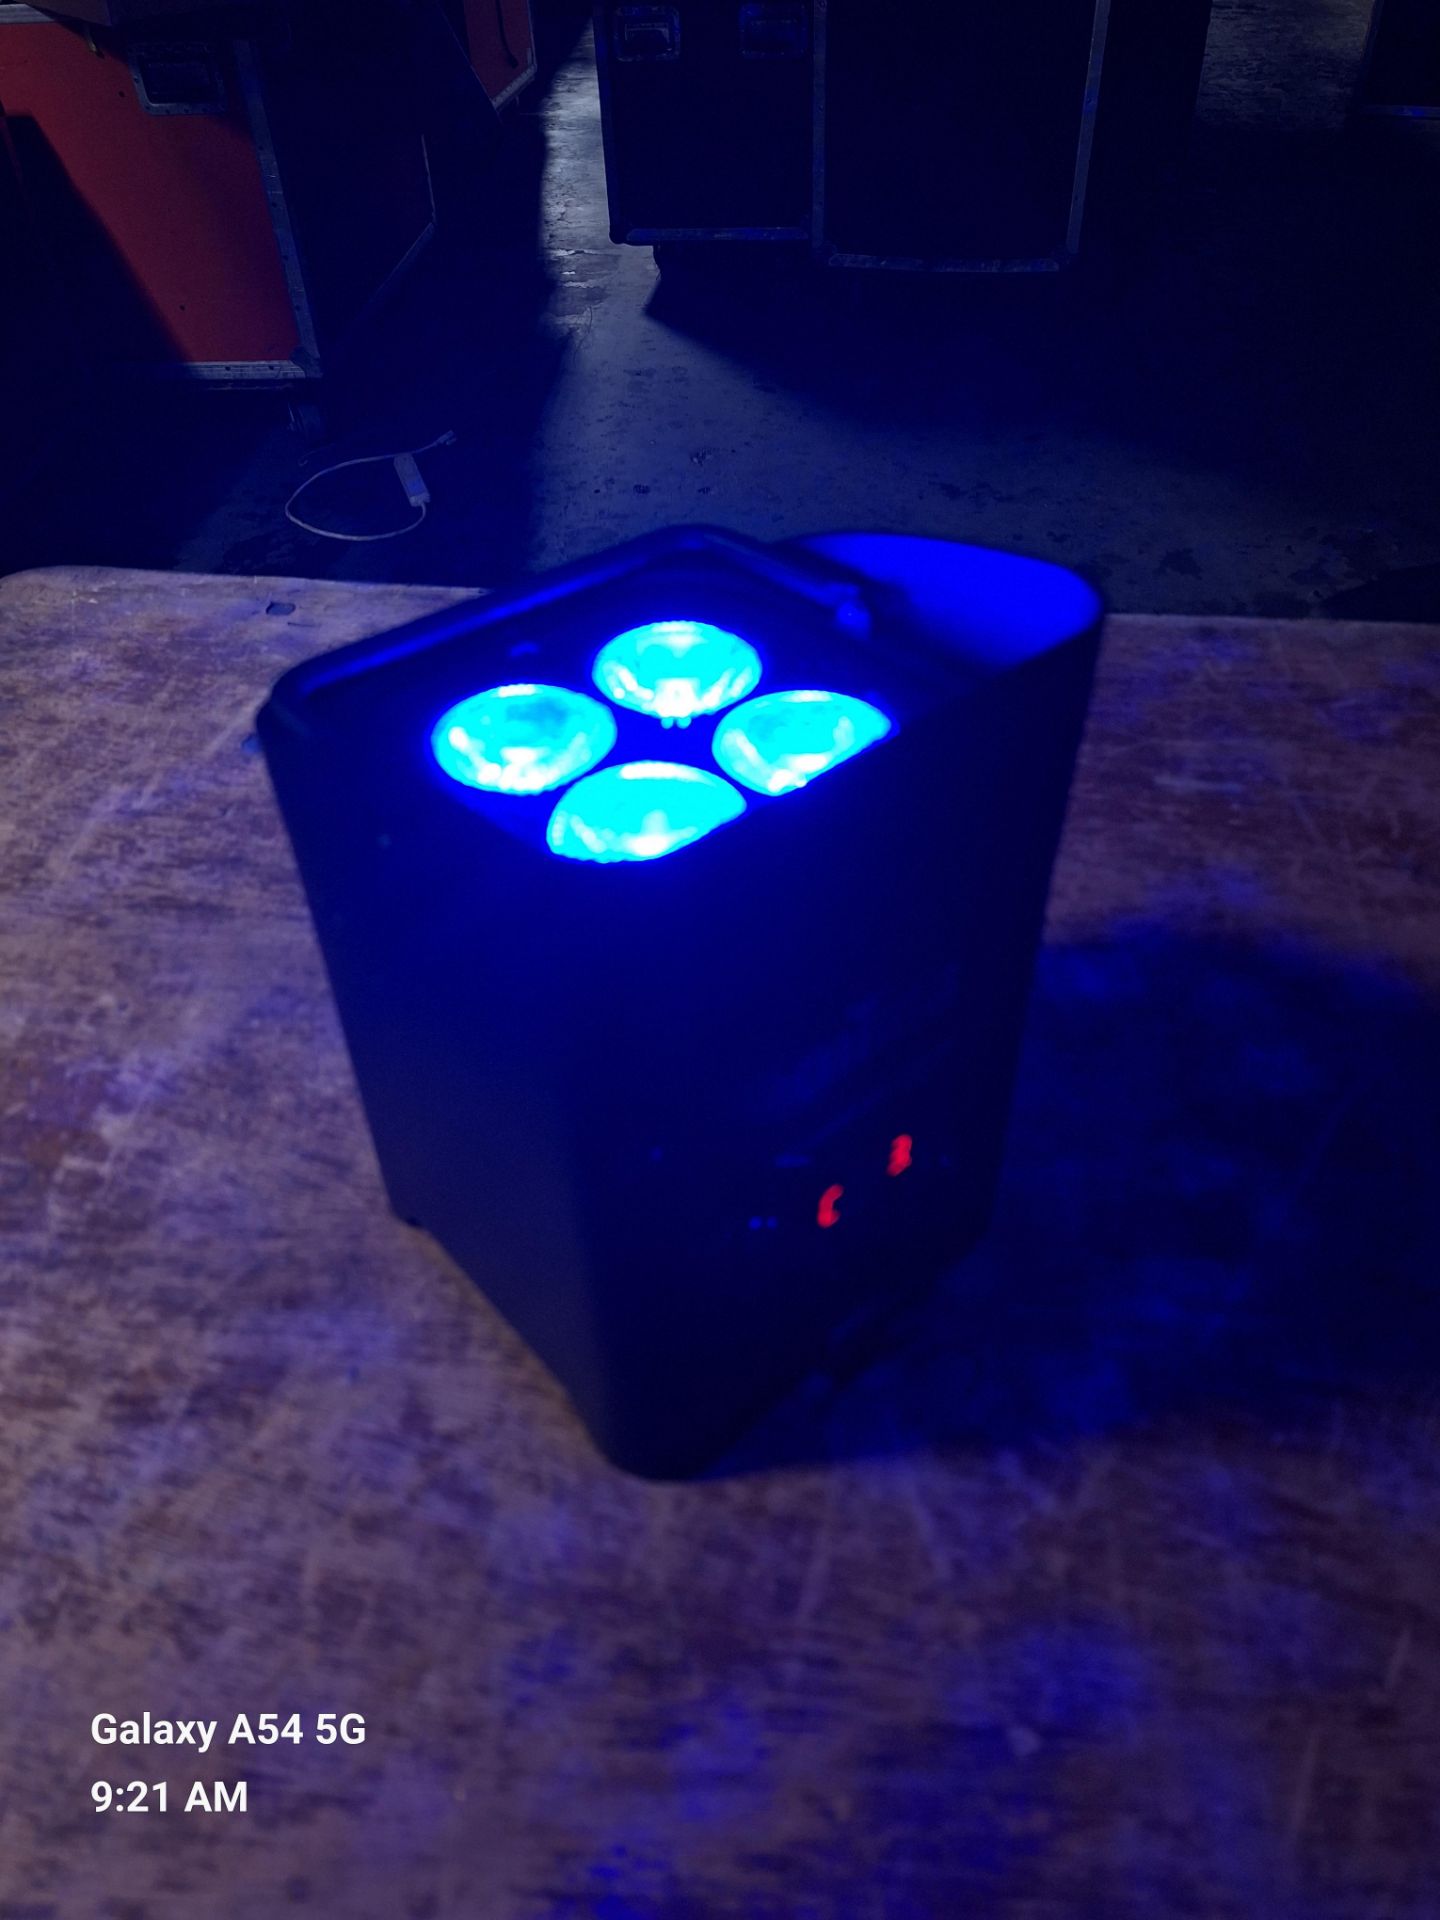 Chauvet Freedom Par Hex 4 (7-10 hours run time on battery)